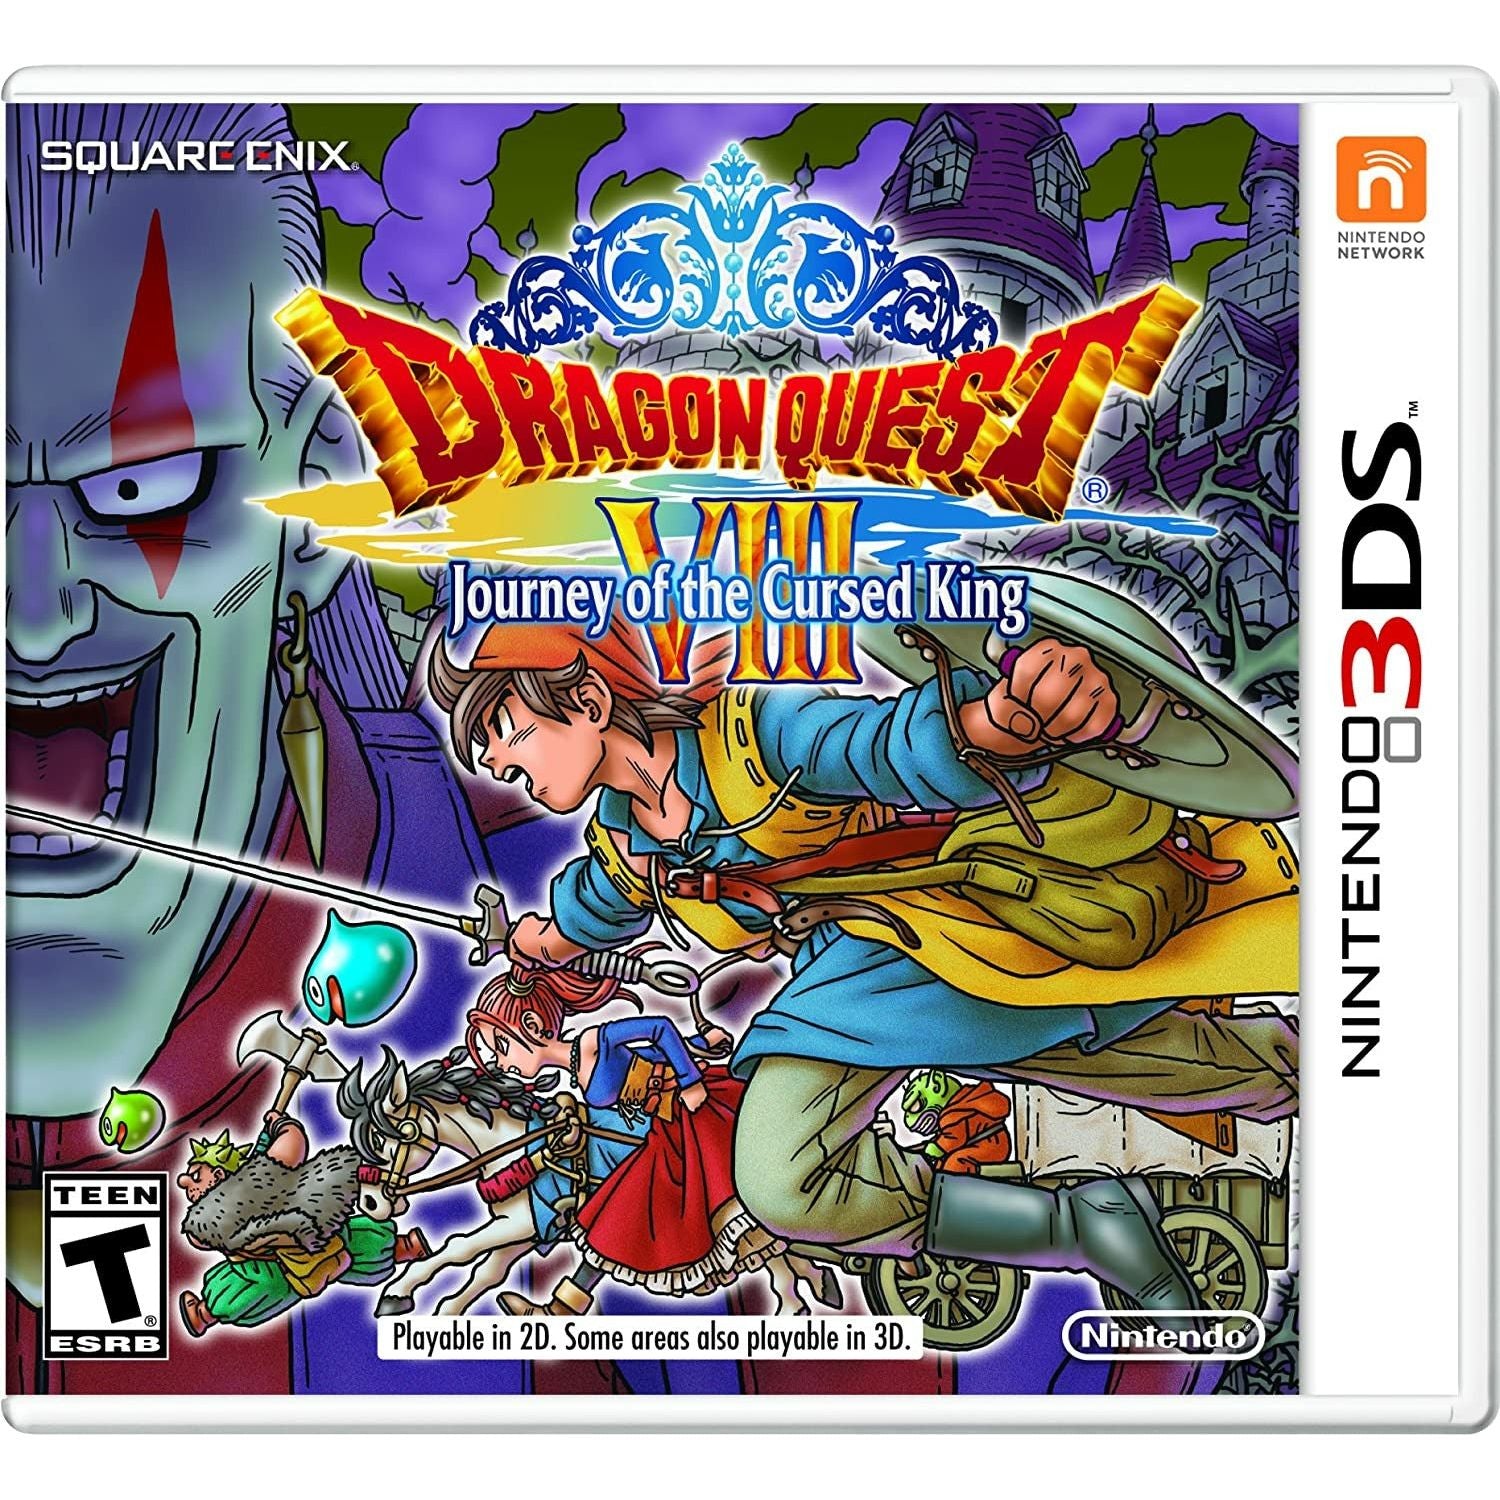 3DS - Dragon Quest VIII Journey of the Cursed King (In Case)